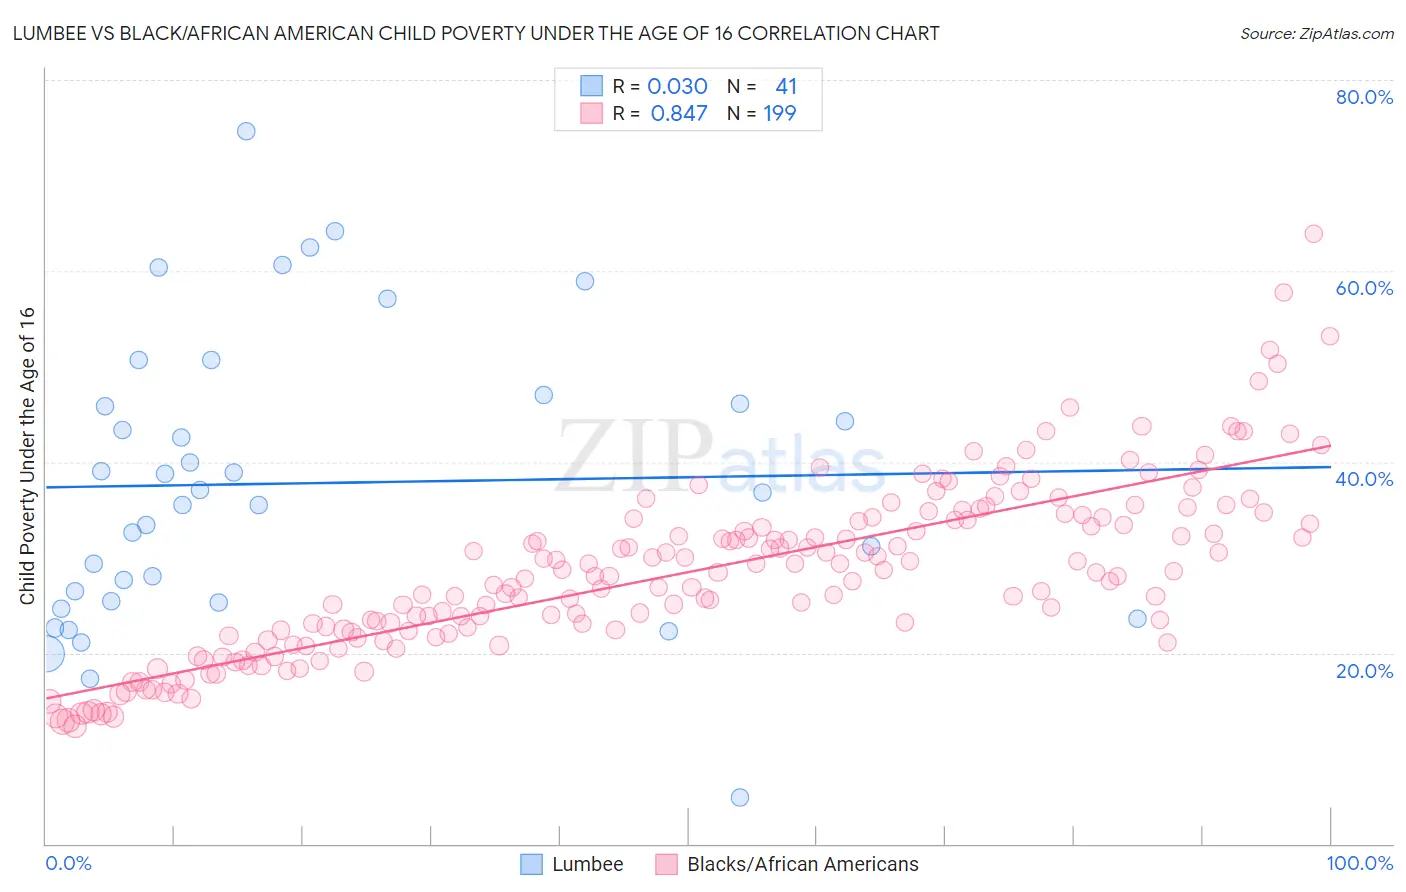 Lumbee vs Black/African American Child Poverty Under the Age of 16